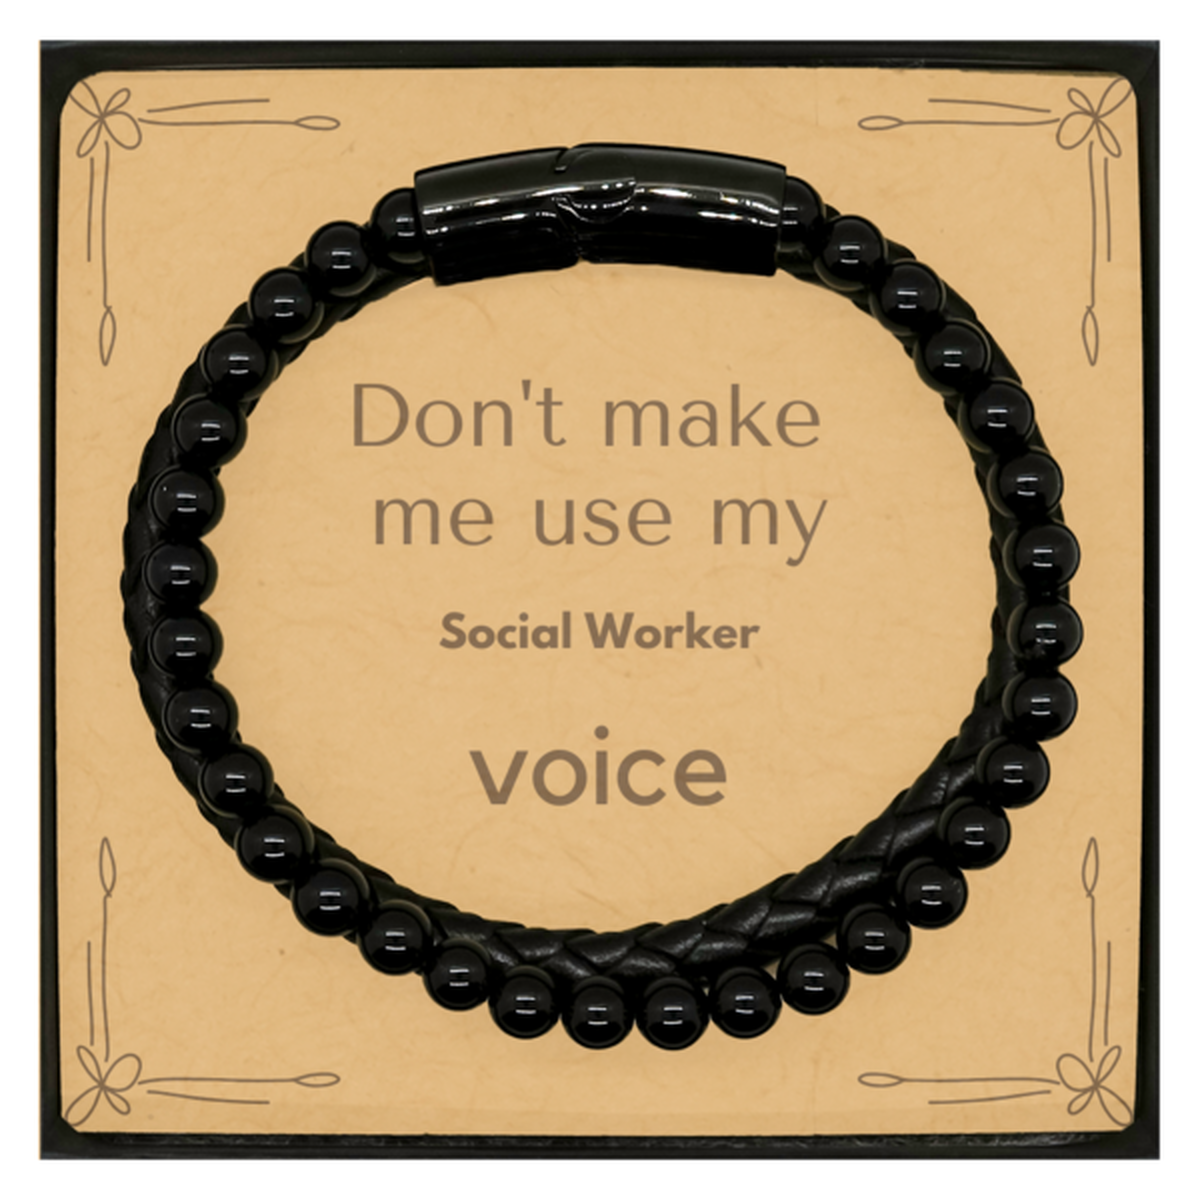 Don't make me use my Social Worker voice, Sarcasm Social Worker Card Gifts, Christmas Social Worker Stone Leather Bracelets Birthday Unique Gifts For Social Worker Coworkers, Men, Women, Colleague, Friends